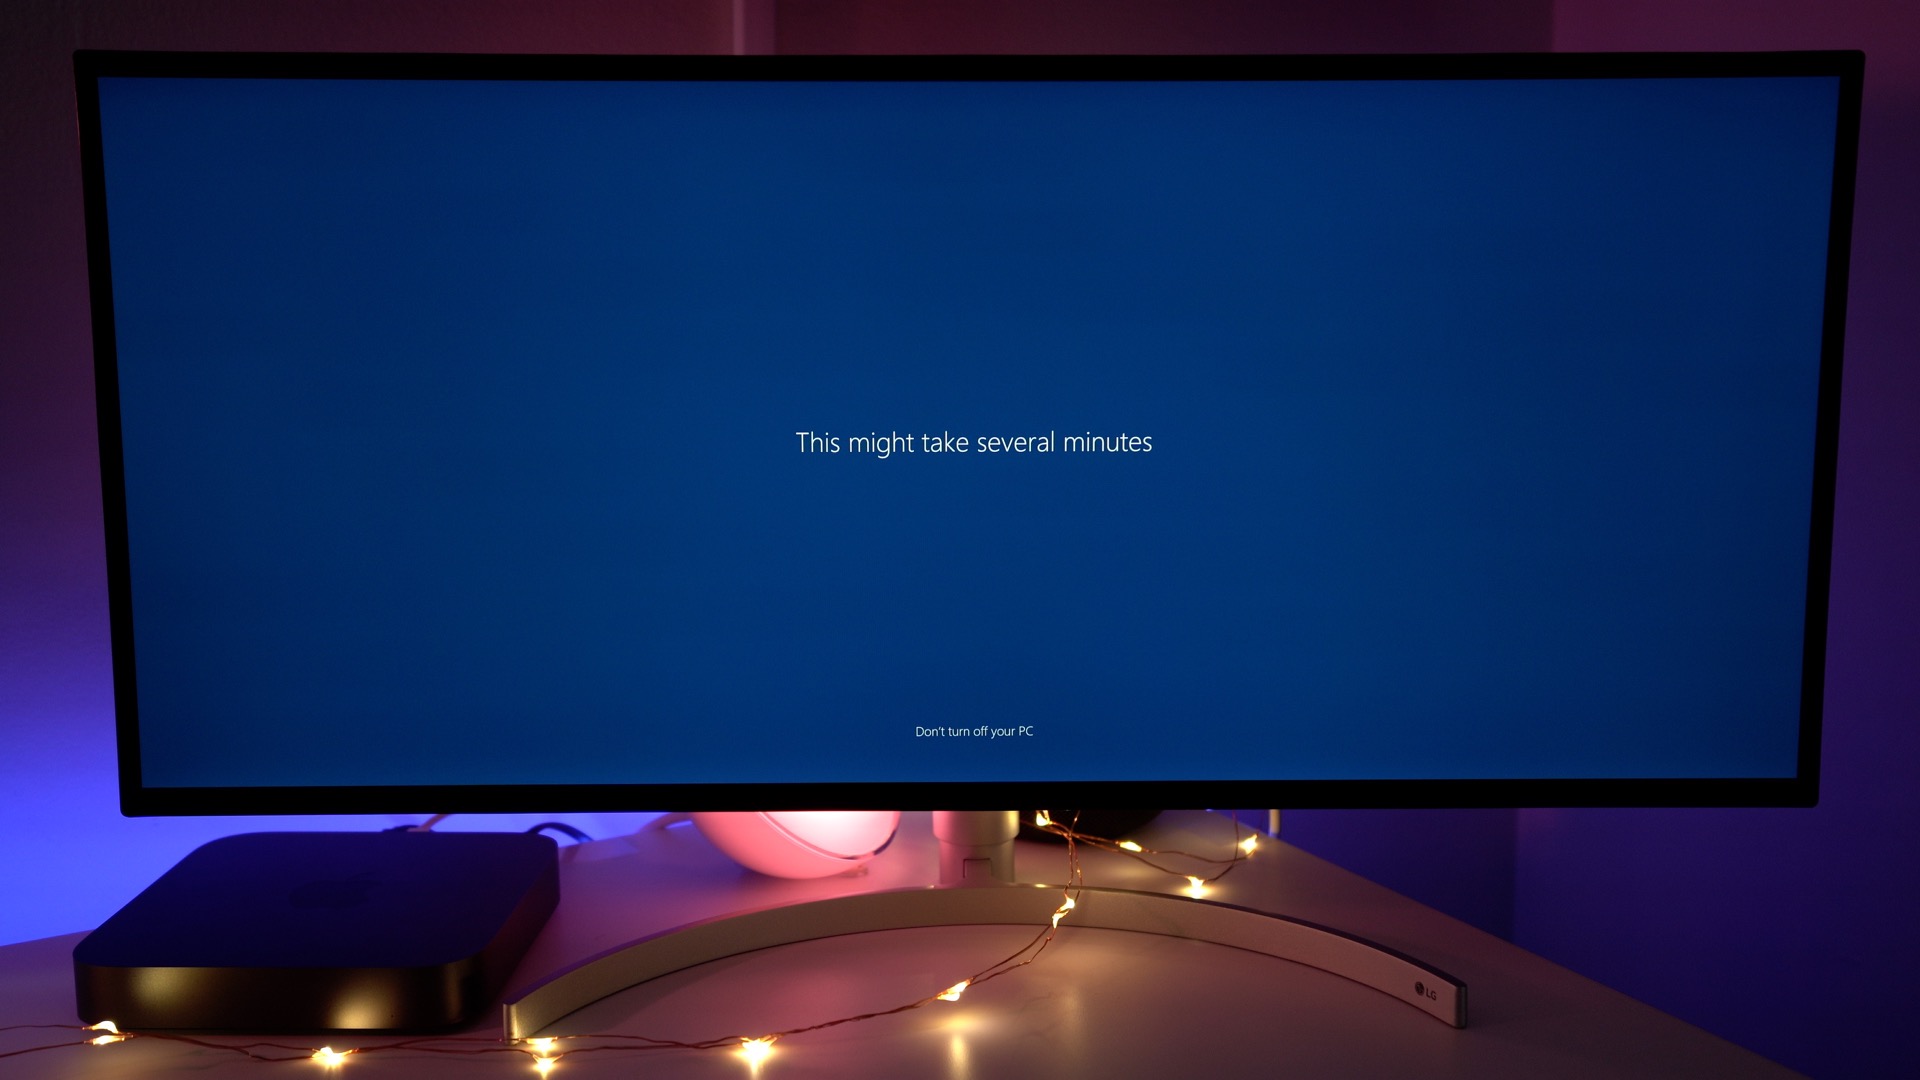 windows 10 will not boot after update